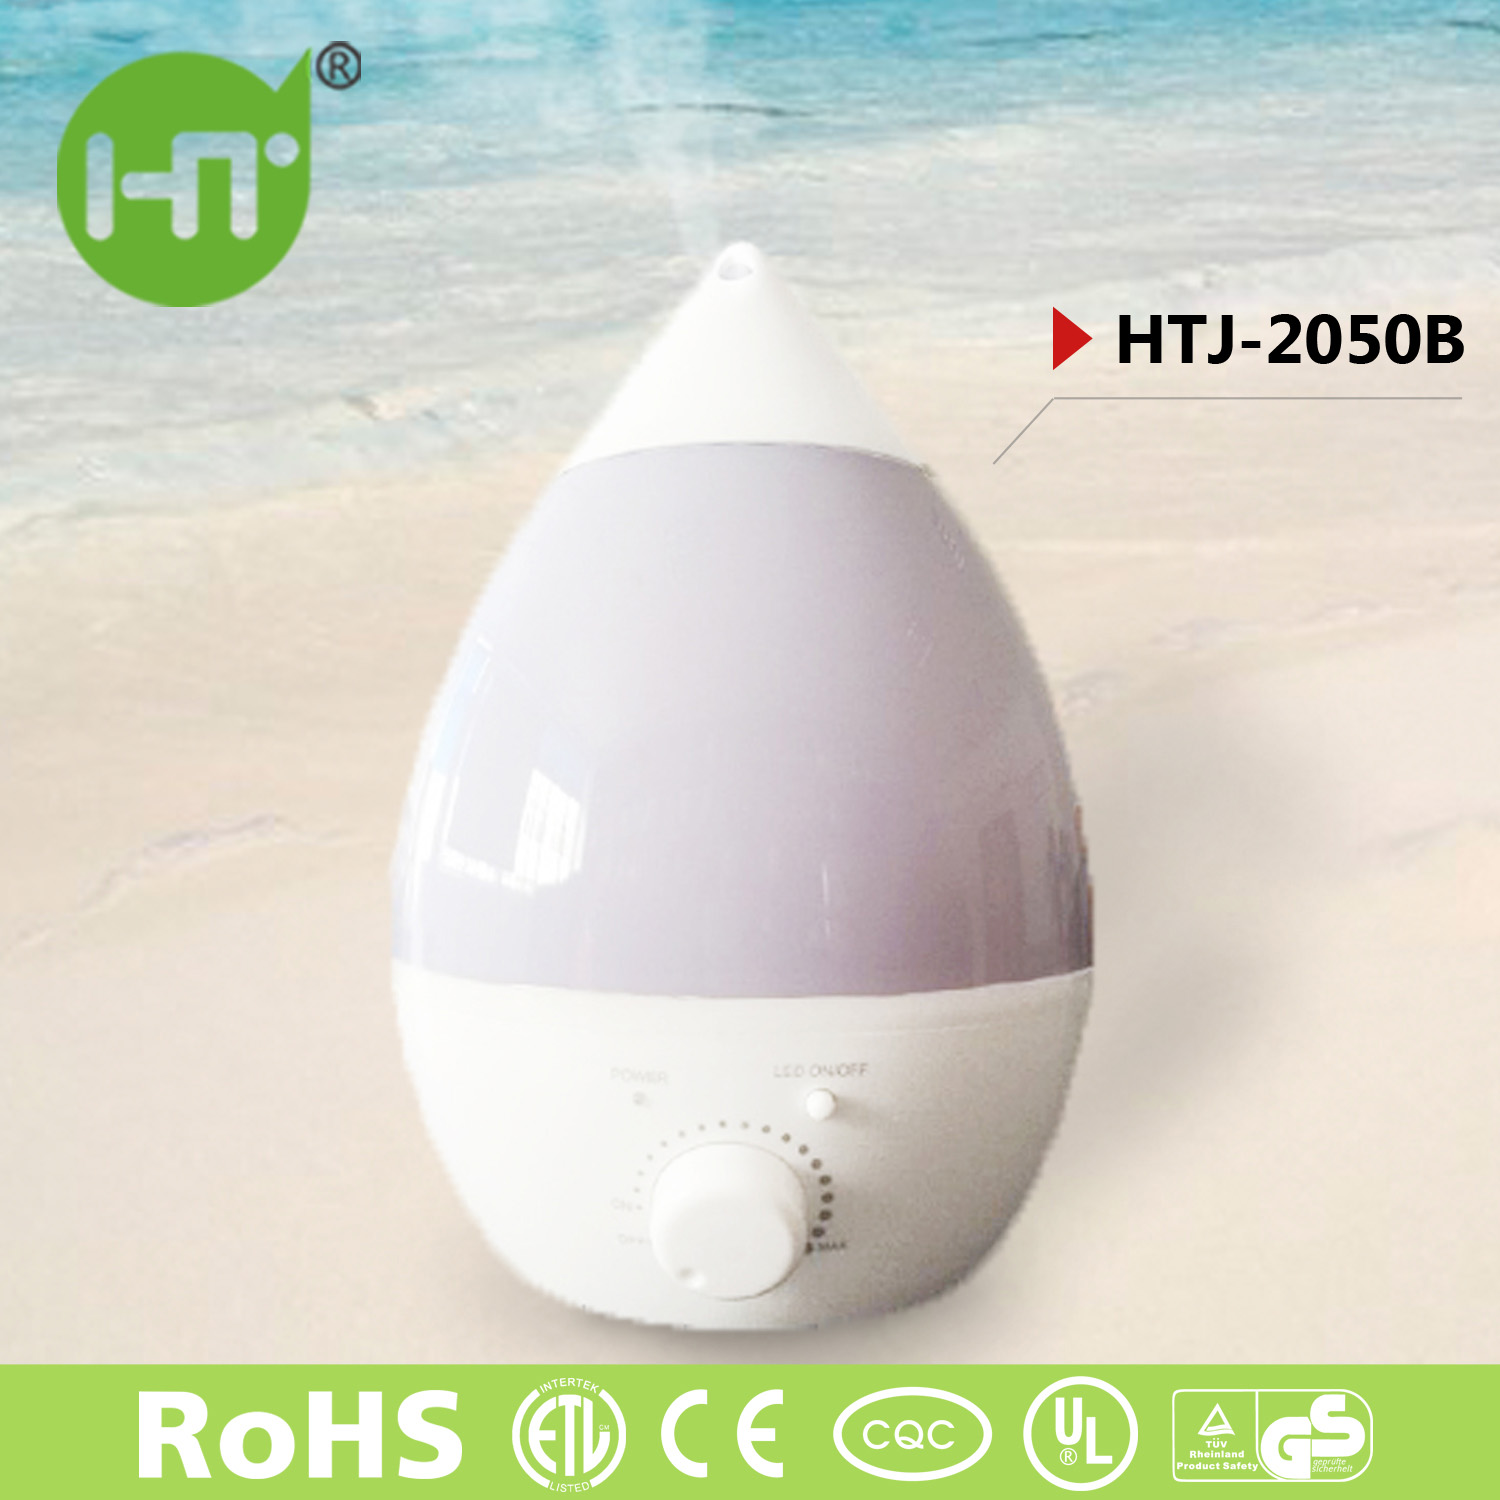 HTJ-2050B 4.0L LED Cool Mist Spray Essential Oil Available Humidifie